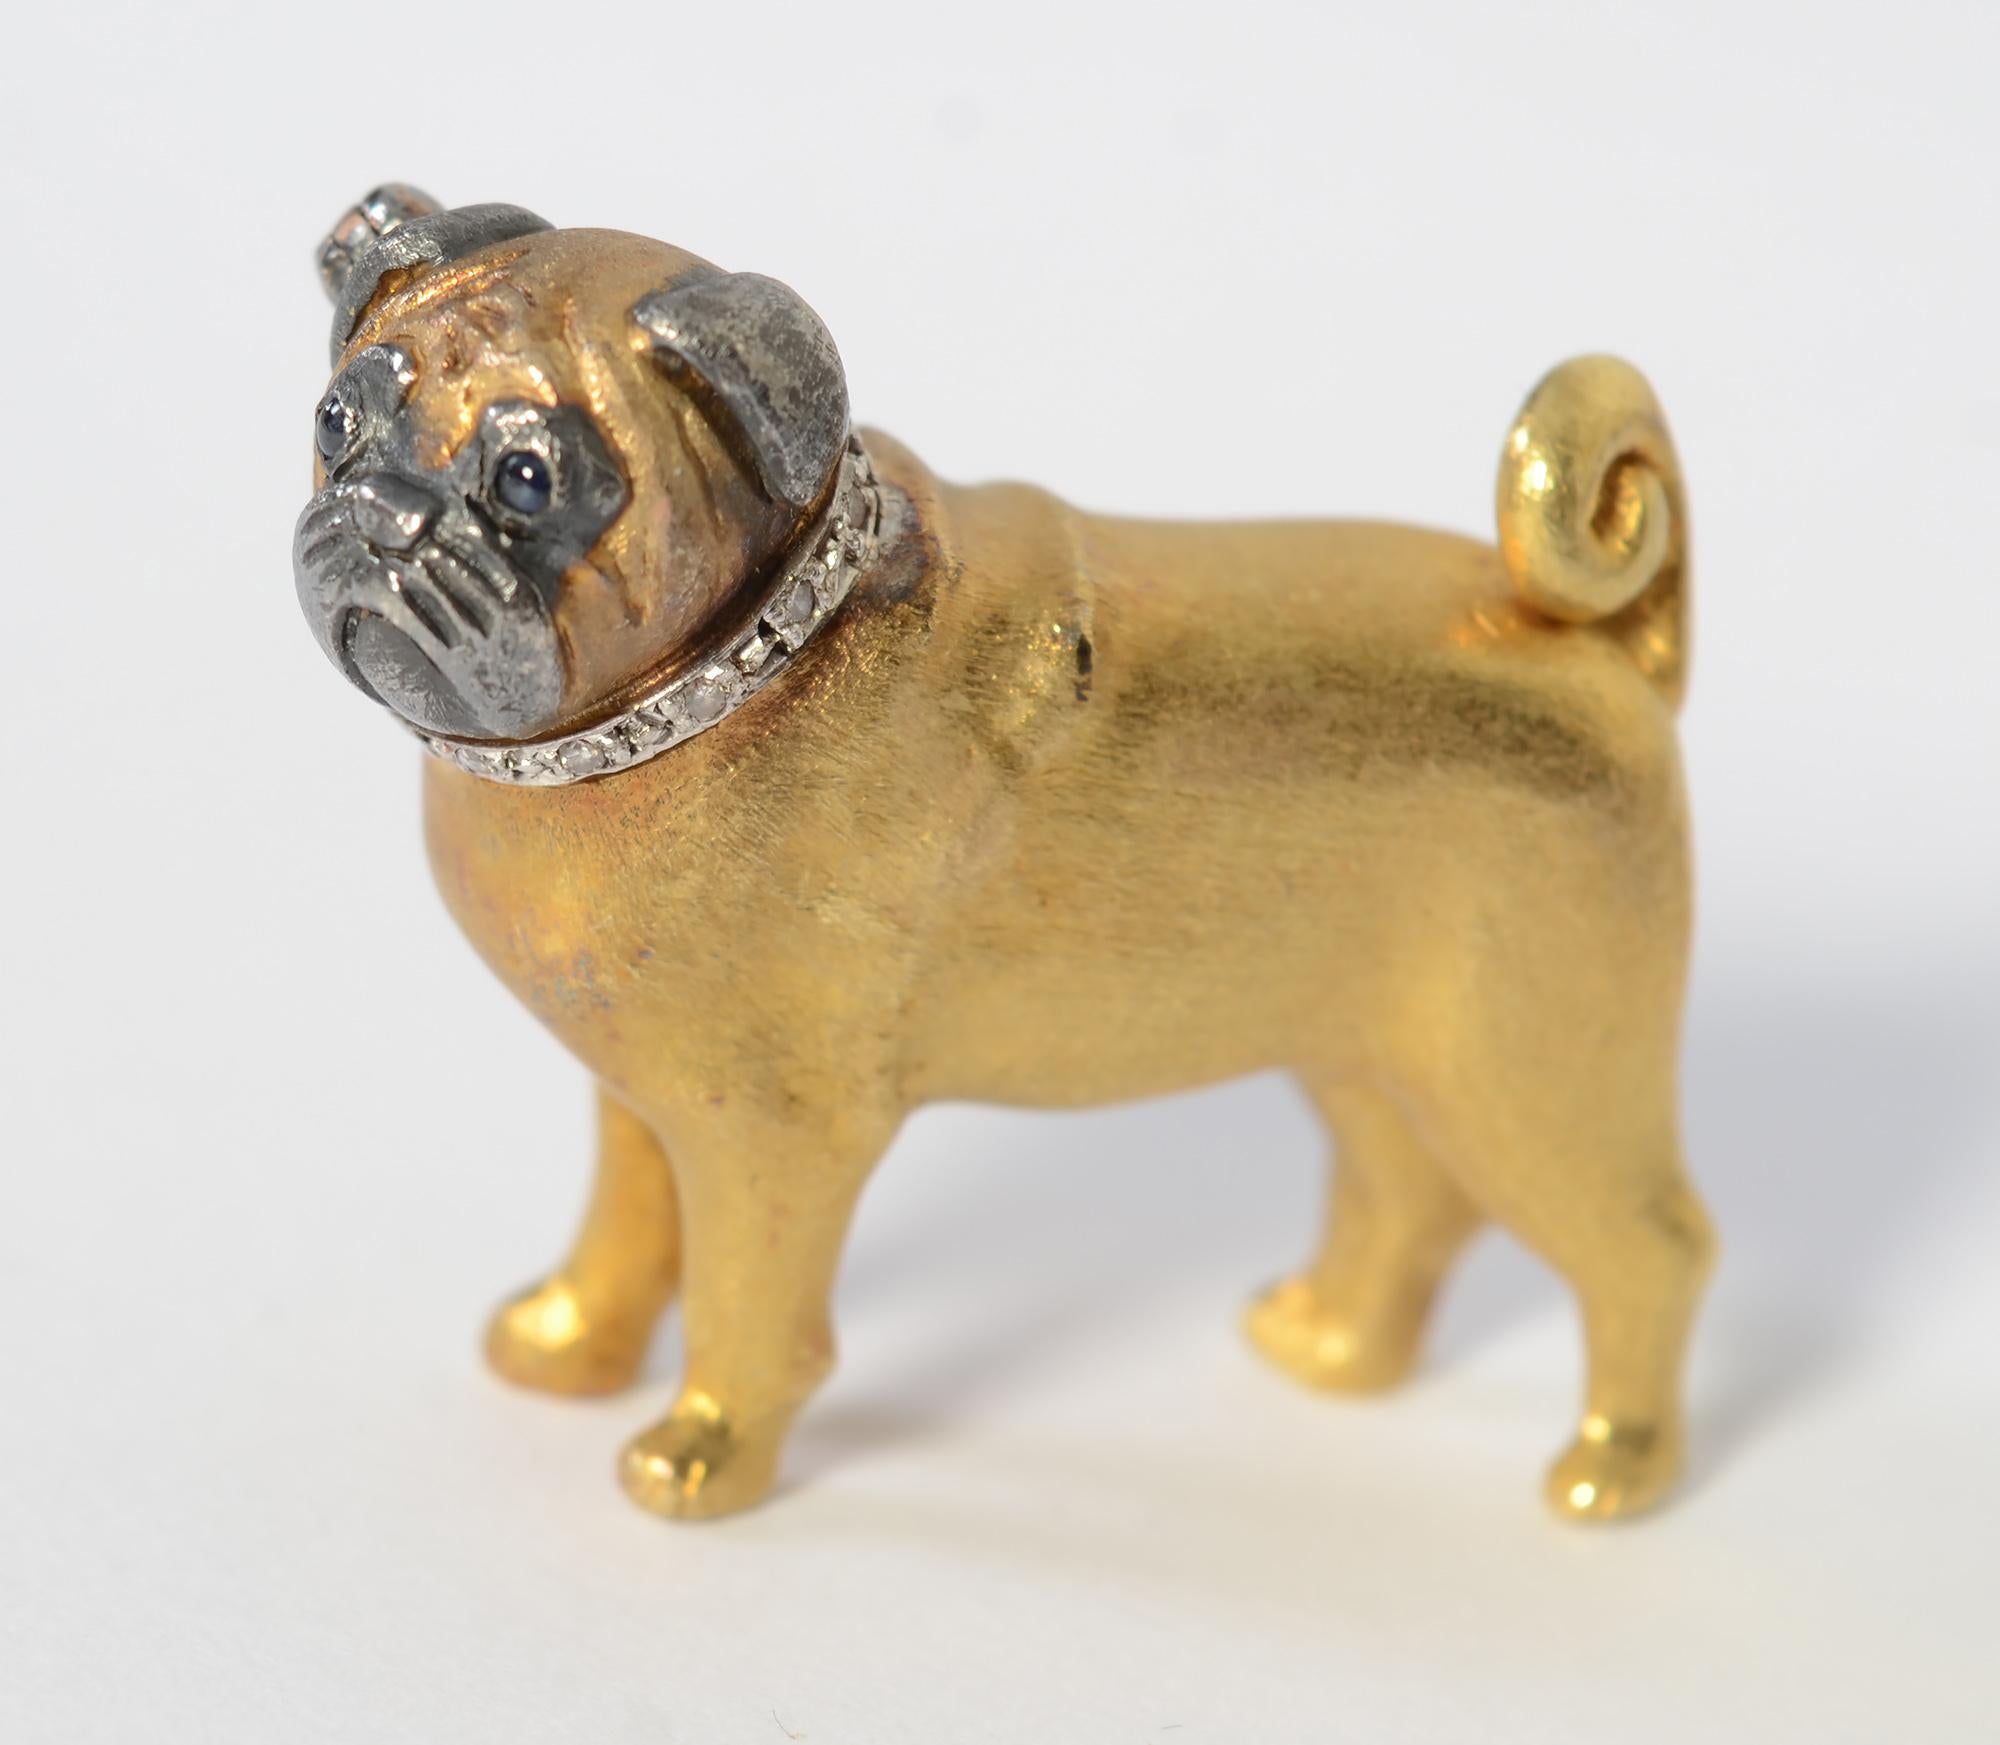 This beautifully made Pug brooch is as solid as the breed itself. It is wonderfully textured and detailed. The protruding eyes appear to be sapphires. The ears and snout are blackened. The brooch has English hallmarks and a maker's mark with which I